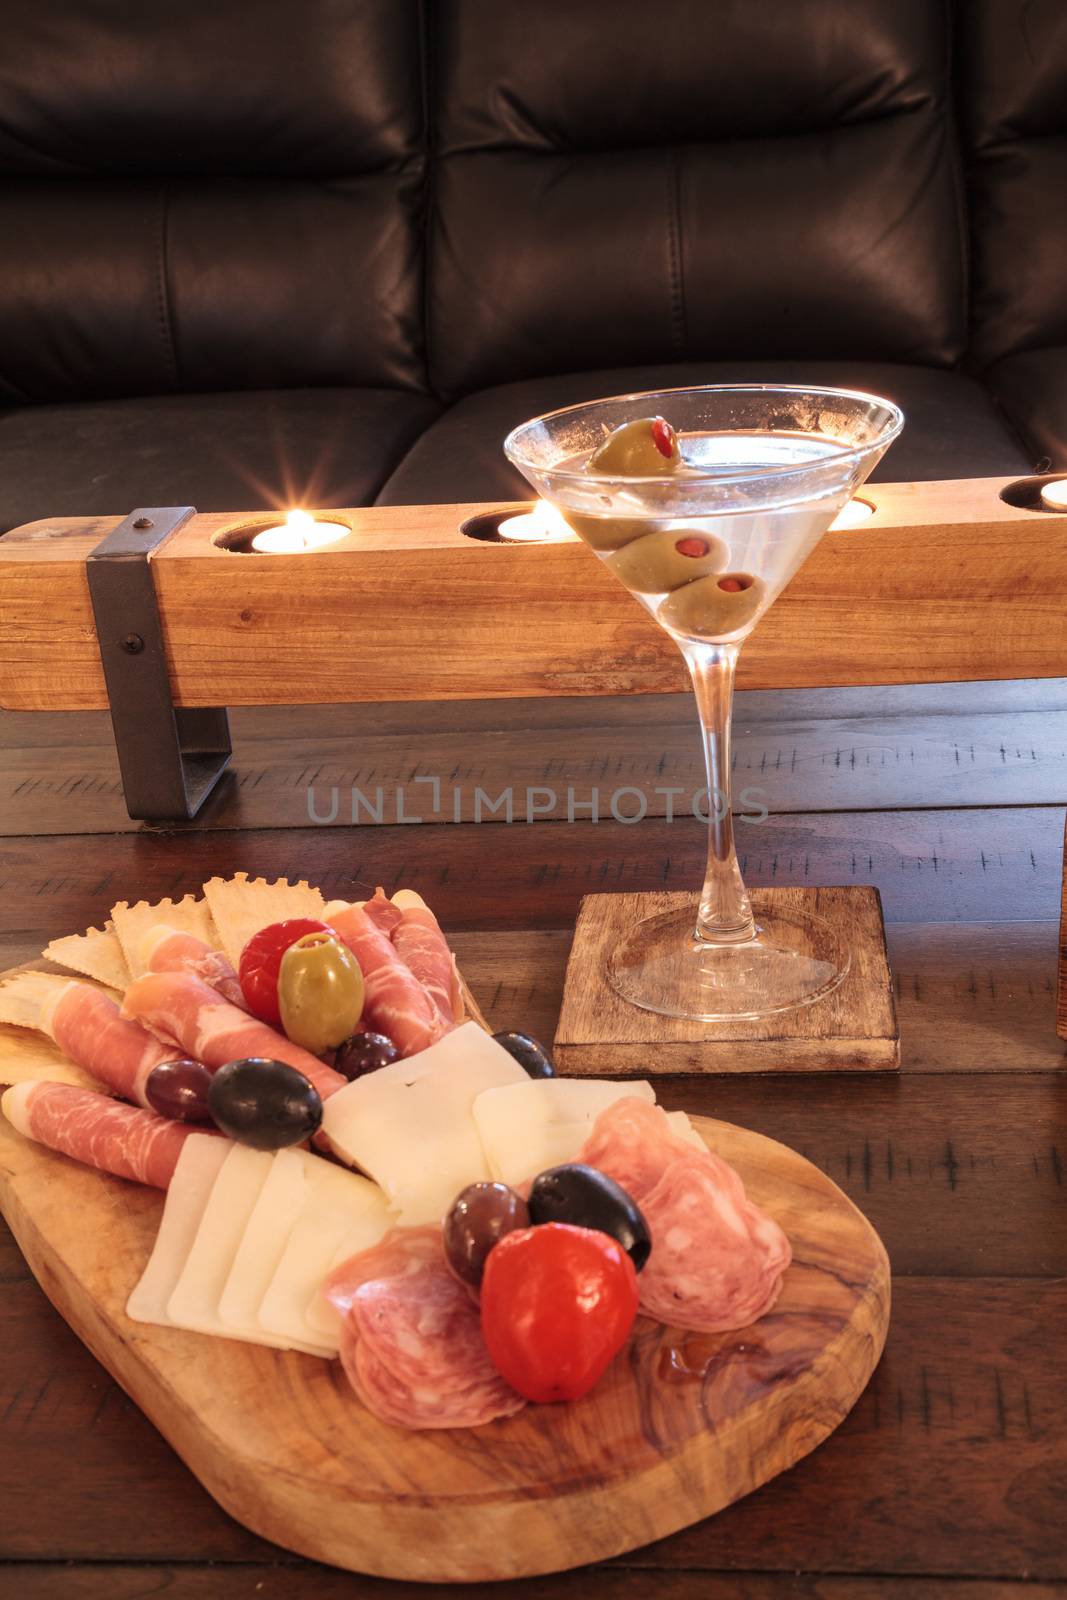 Martini with olives and a Charcuterie board on rustic wood with candles behind a spread of prosciutto panino, mozzarella cheese, Genoa salami, Fontina cheese and artisanal crackers.